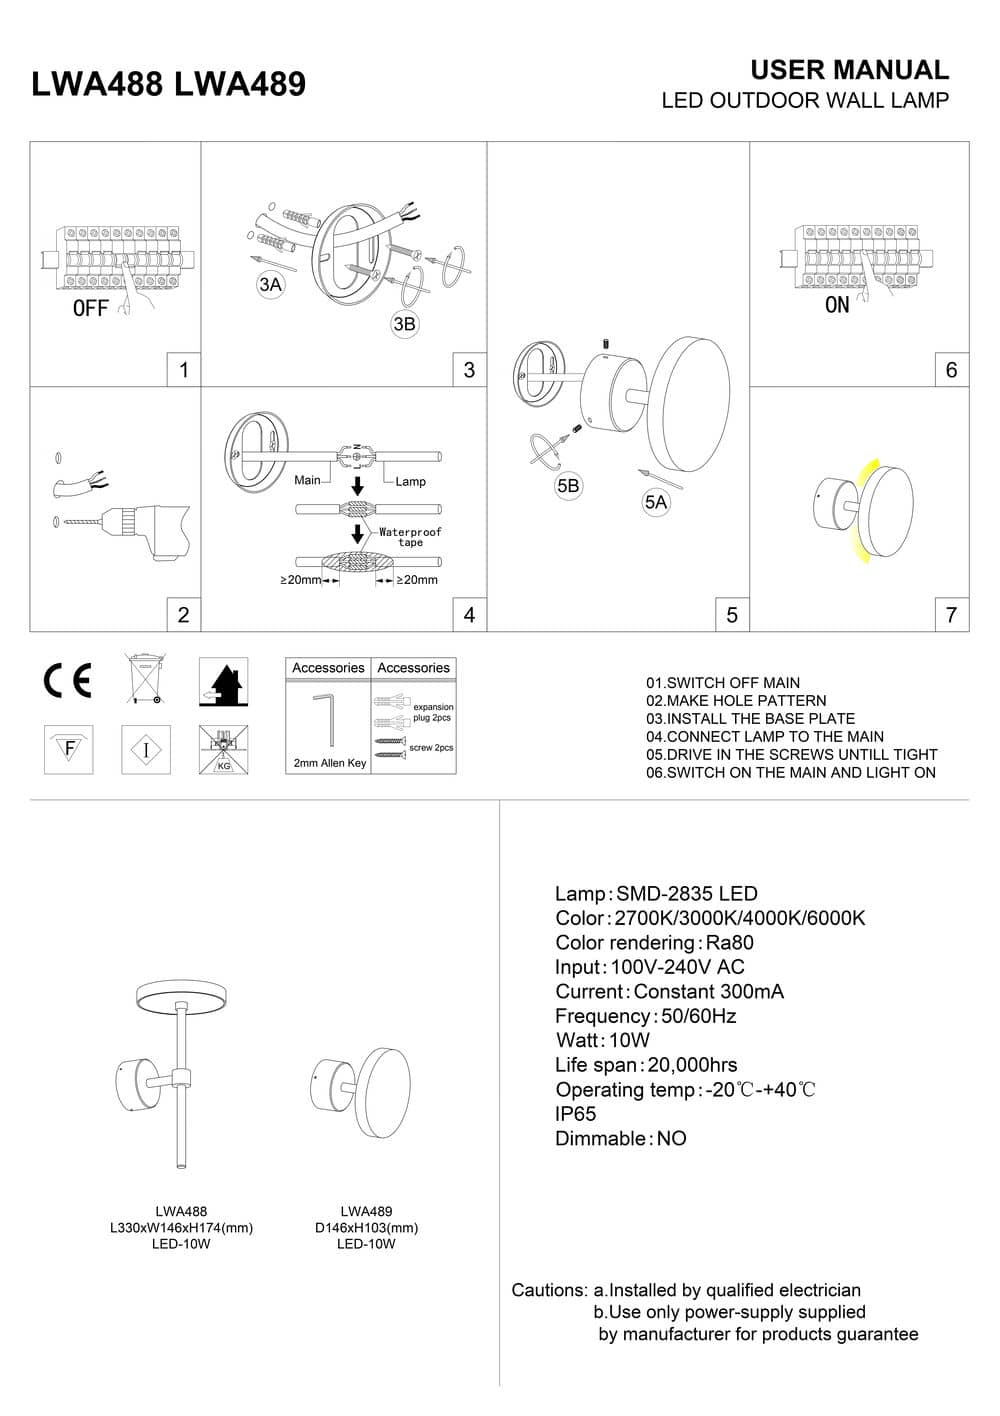 LWA488 LWA489 black IP65 outdoor LED wall light fitting installation guide